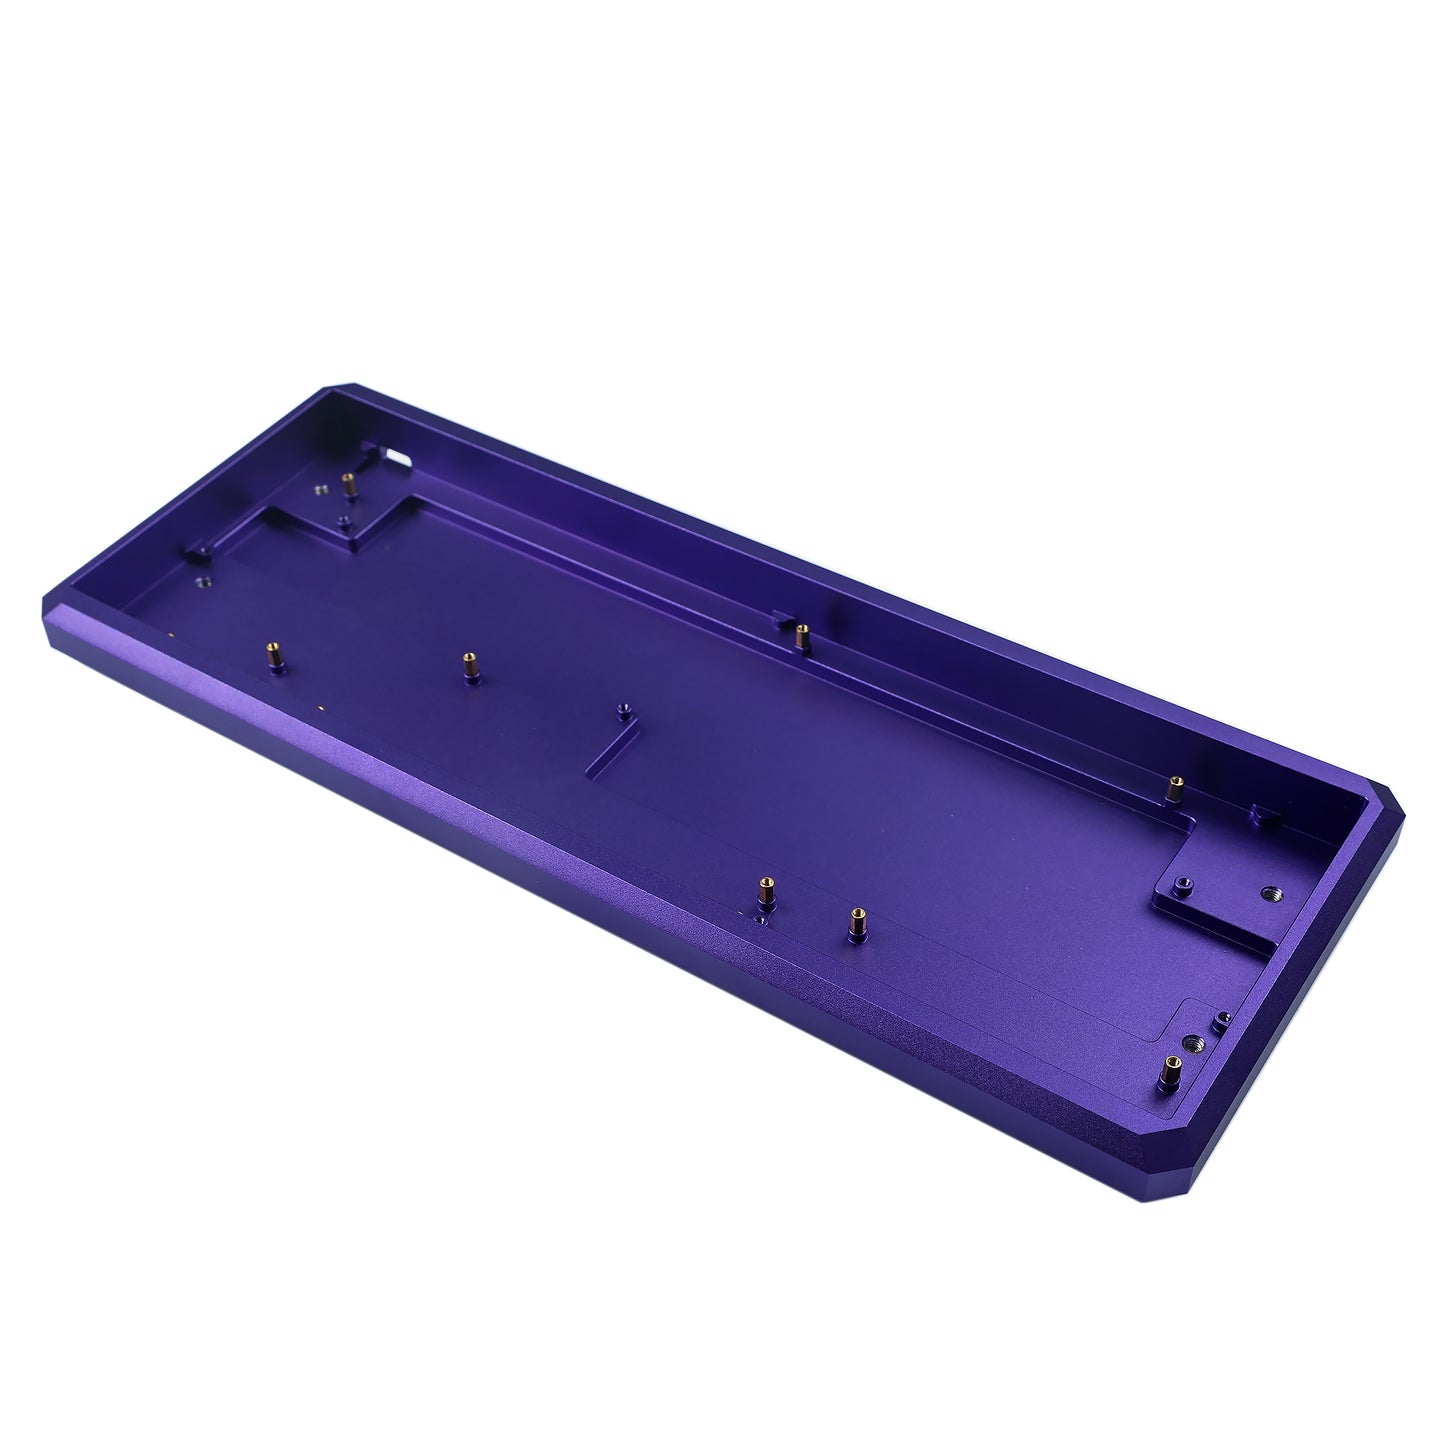 GK64 Aluminum/PC Case Kit(RGB Hotswap PCB/Bluetooth Or Wired Programmable)